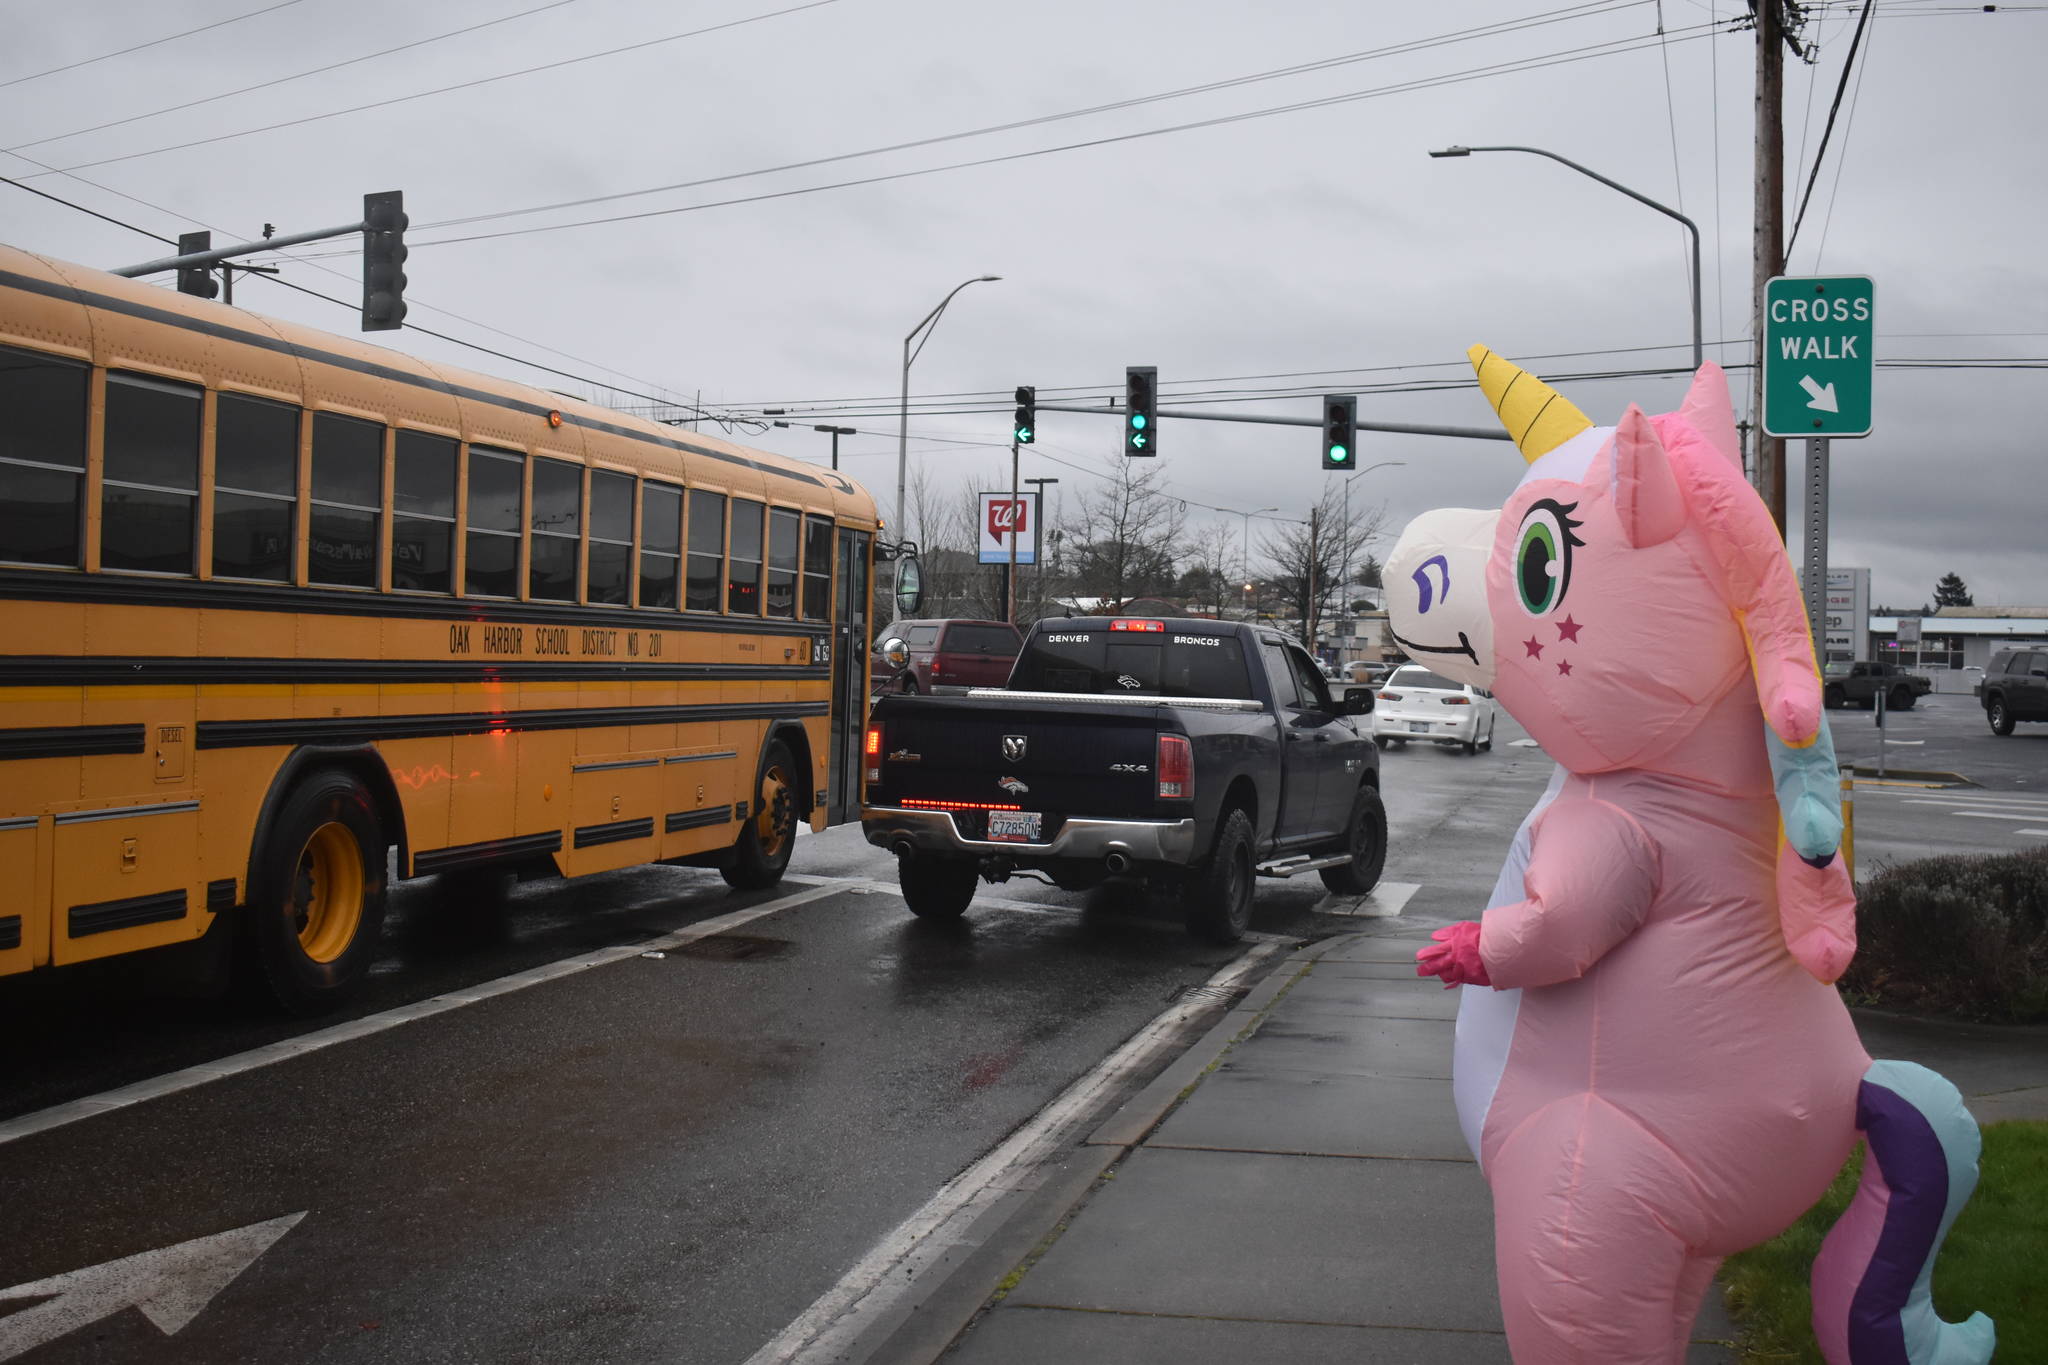 The woman inside the unicorn suit says she dons the outfit just to bring people a smile. Photo by Emily Gilbert/Whidbey News-Times